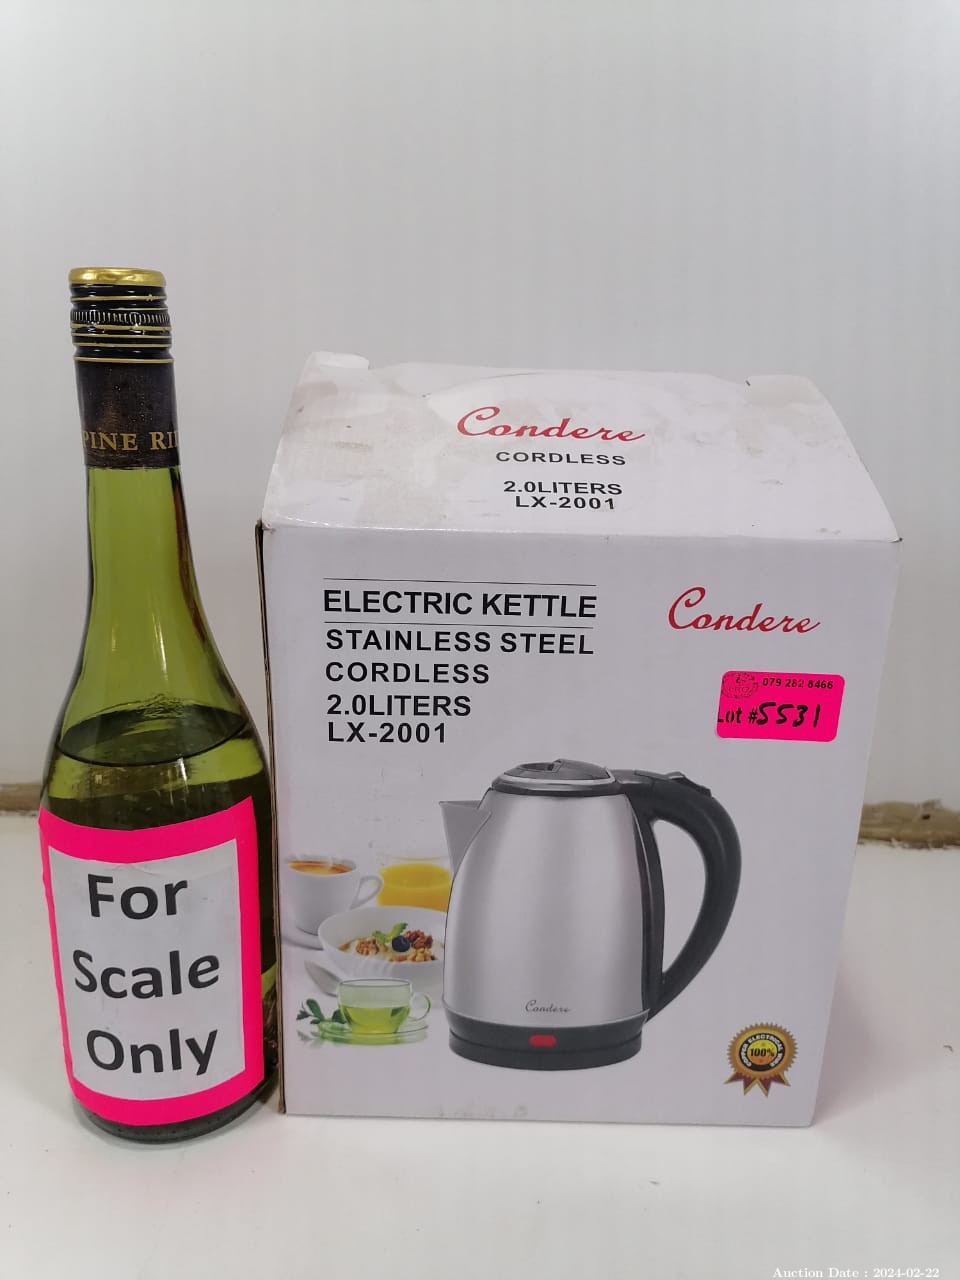 5644 - Condere Electric Kettle